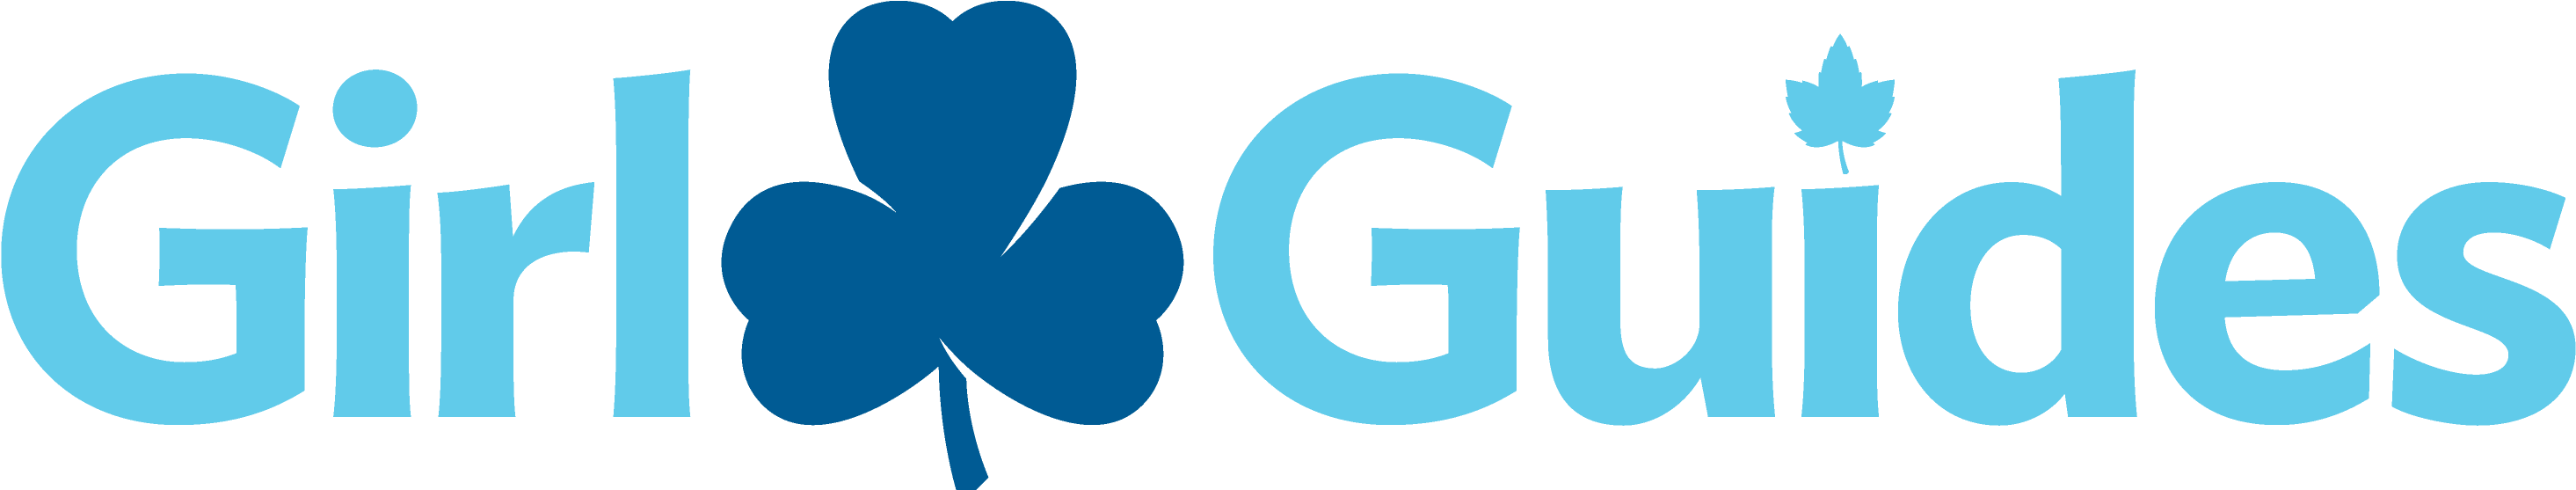 Already Registered And Need A Uniform They Are Available - Girl Guides Of Canada New Logo (3380x1008)